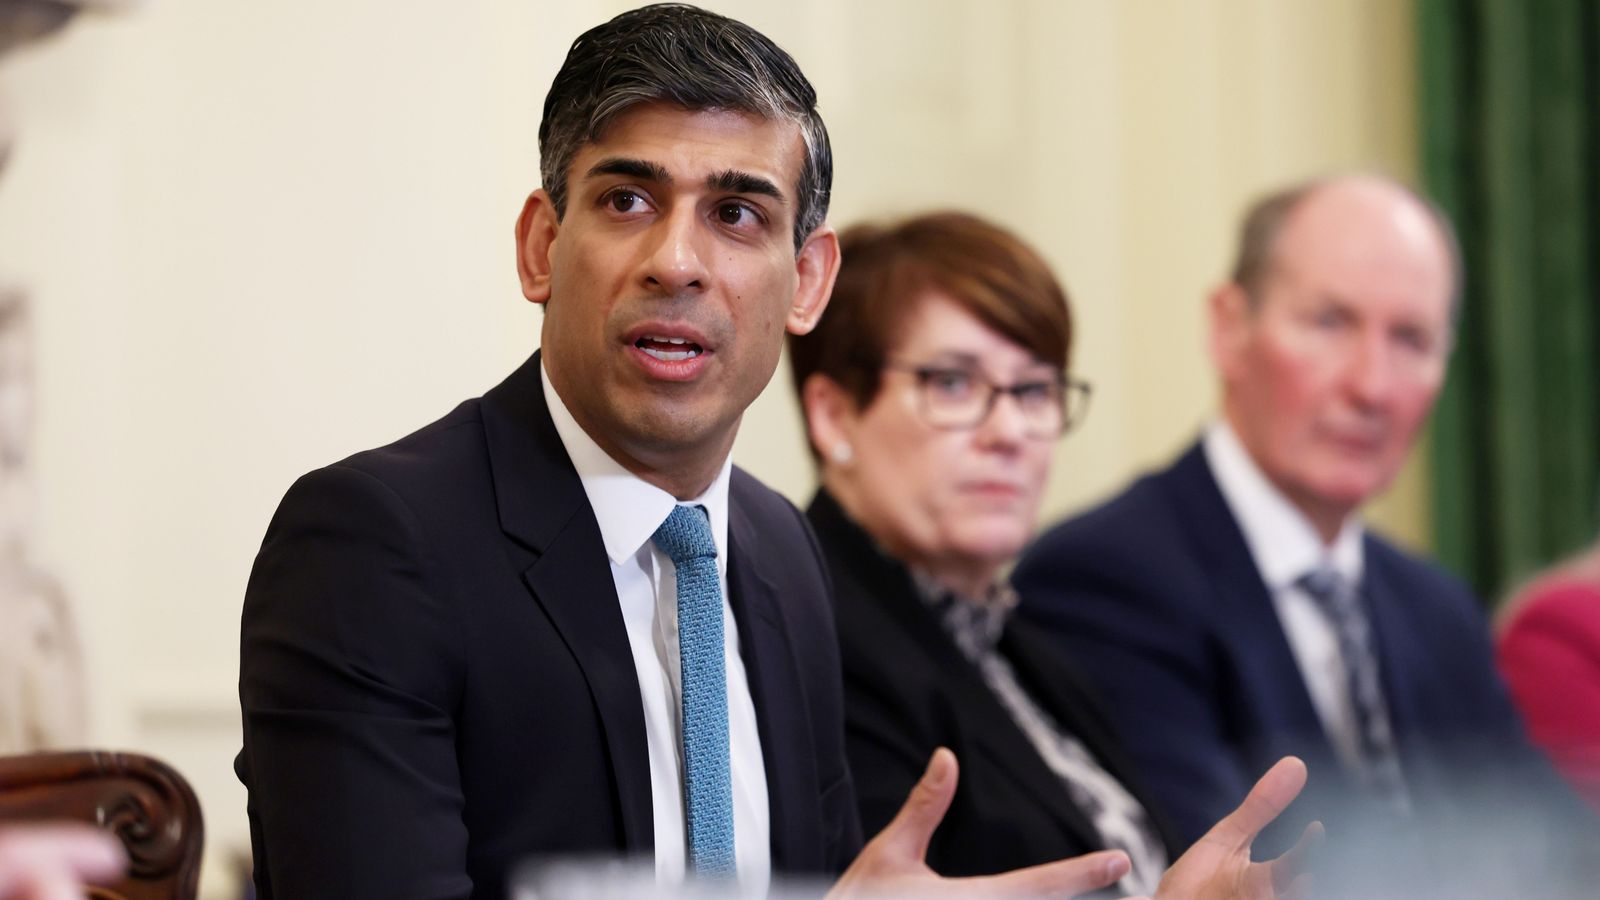 By-election results: Double trouble for PM - Labour candidates overturn huge majorities in blow for Rishi Sunak